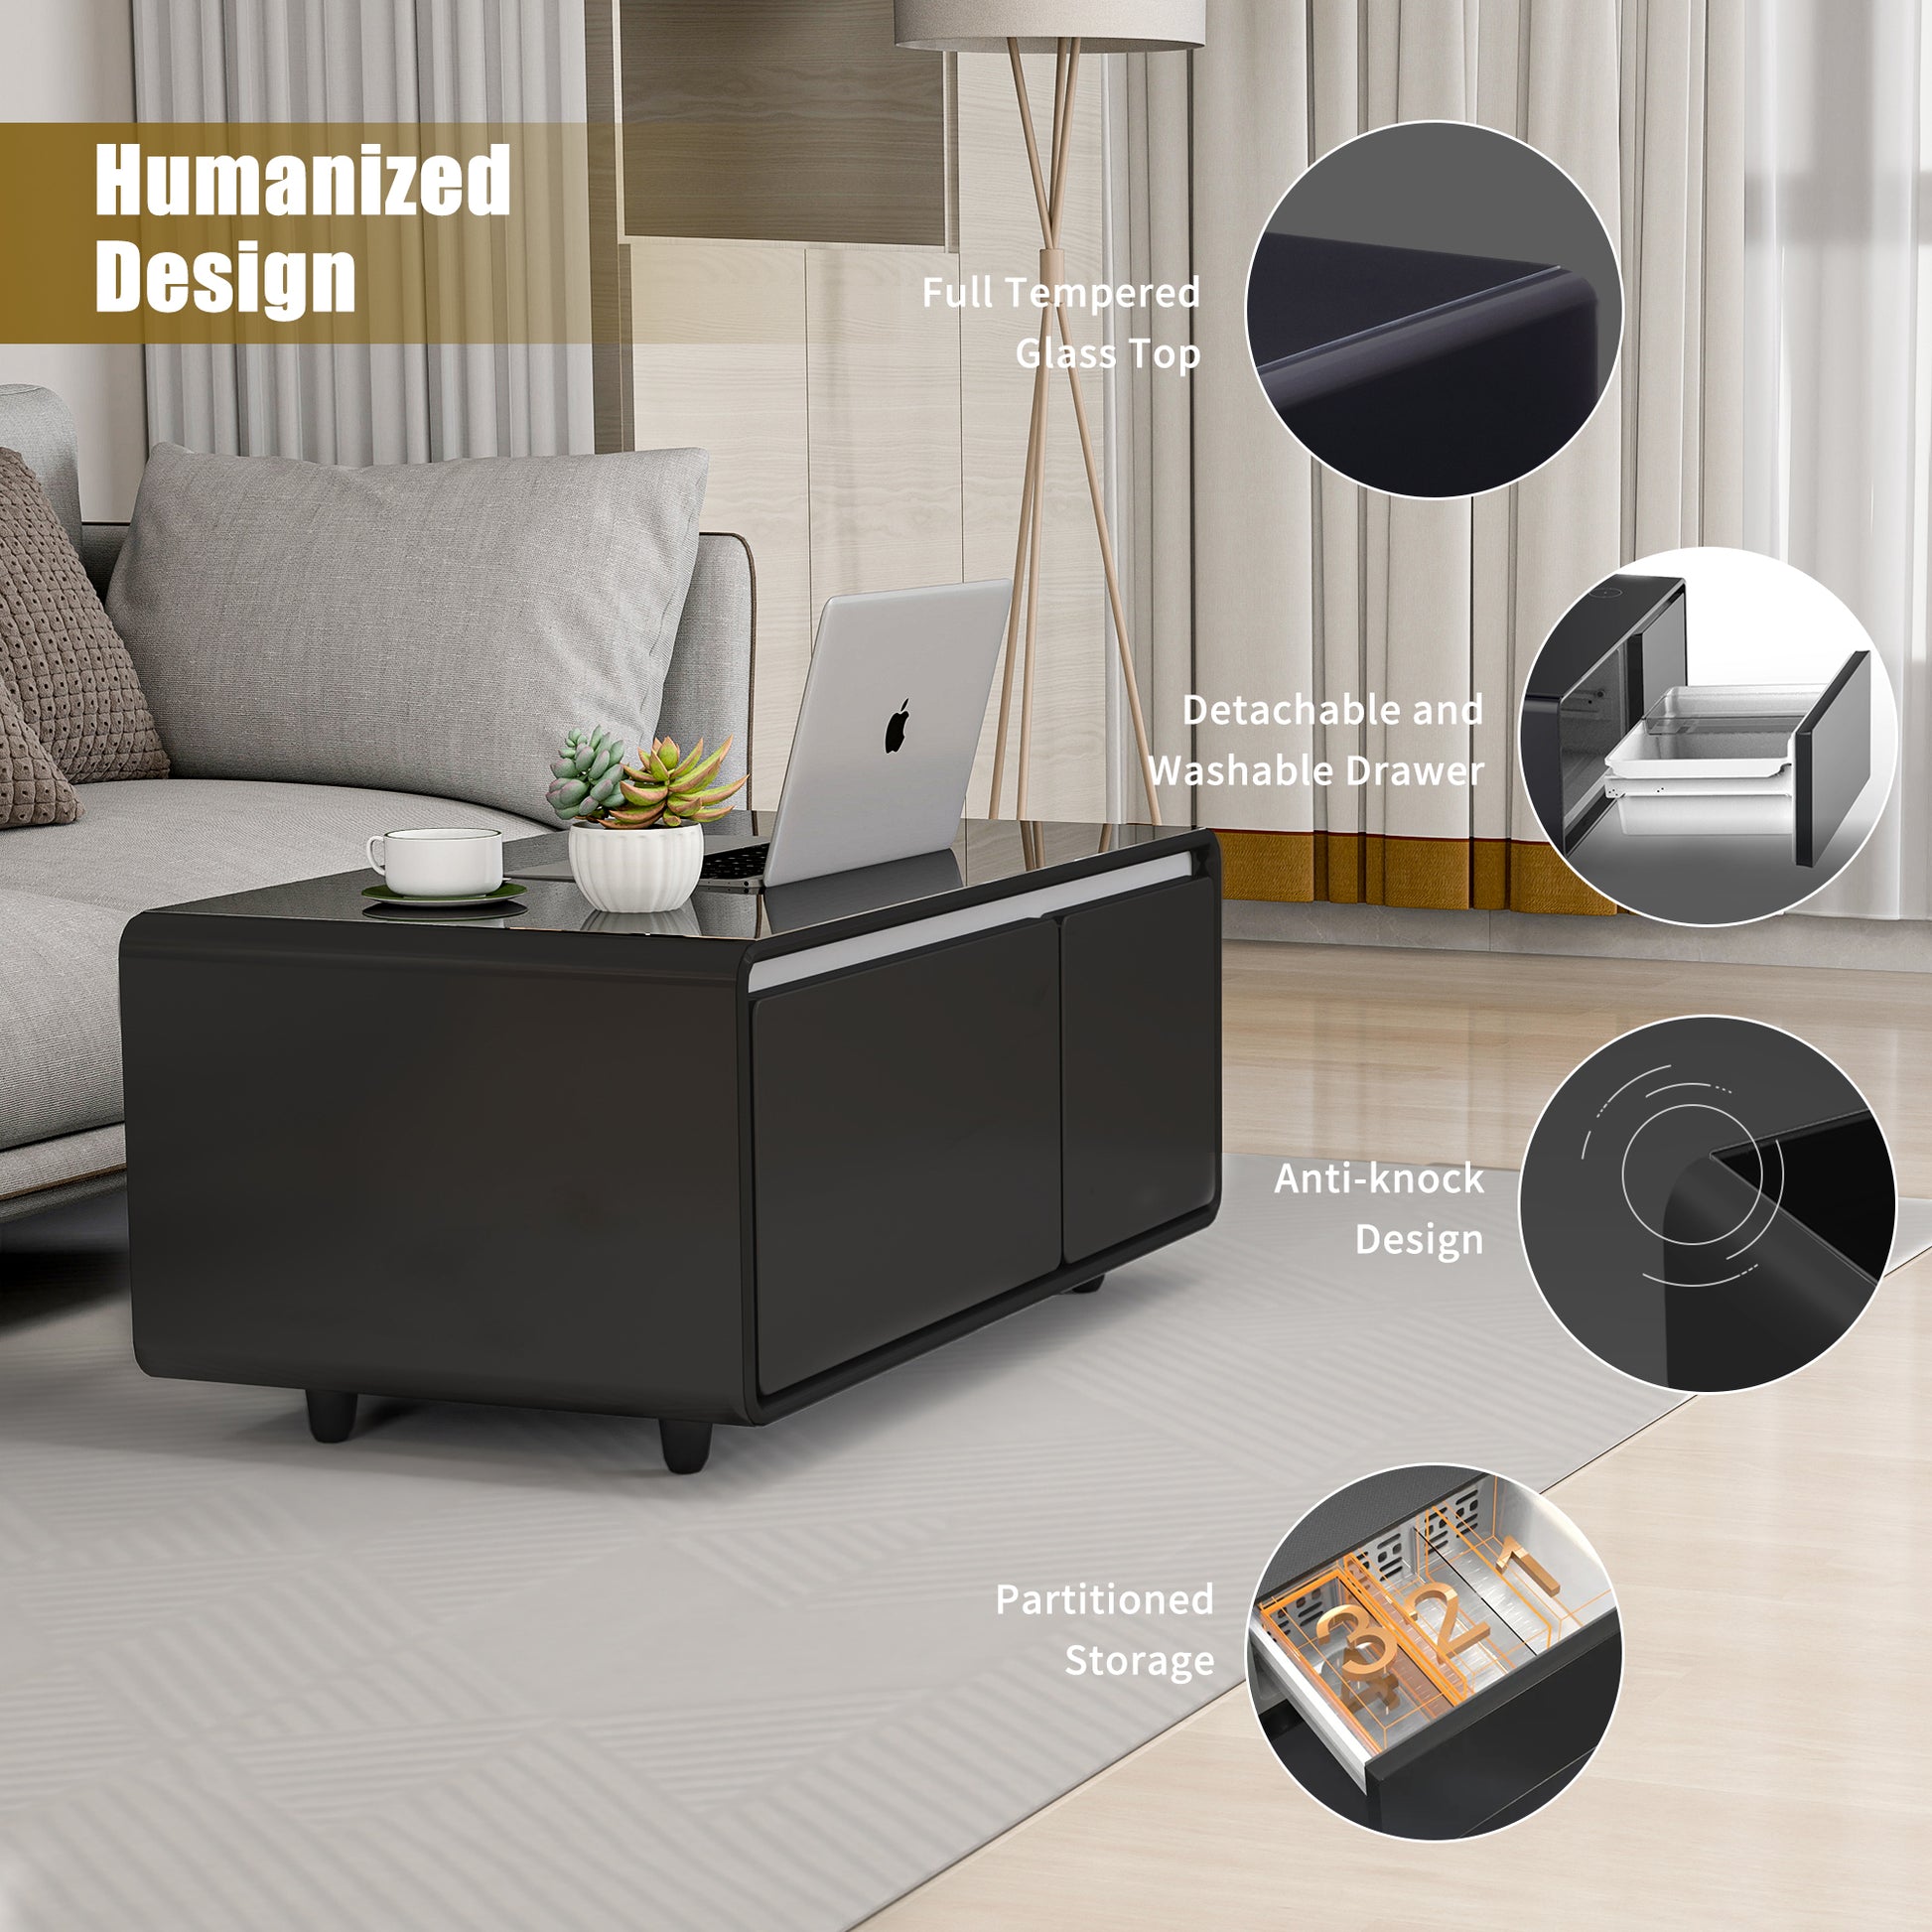 Modern Smart Coffee Table with Built in Fridge black-primary living